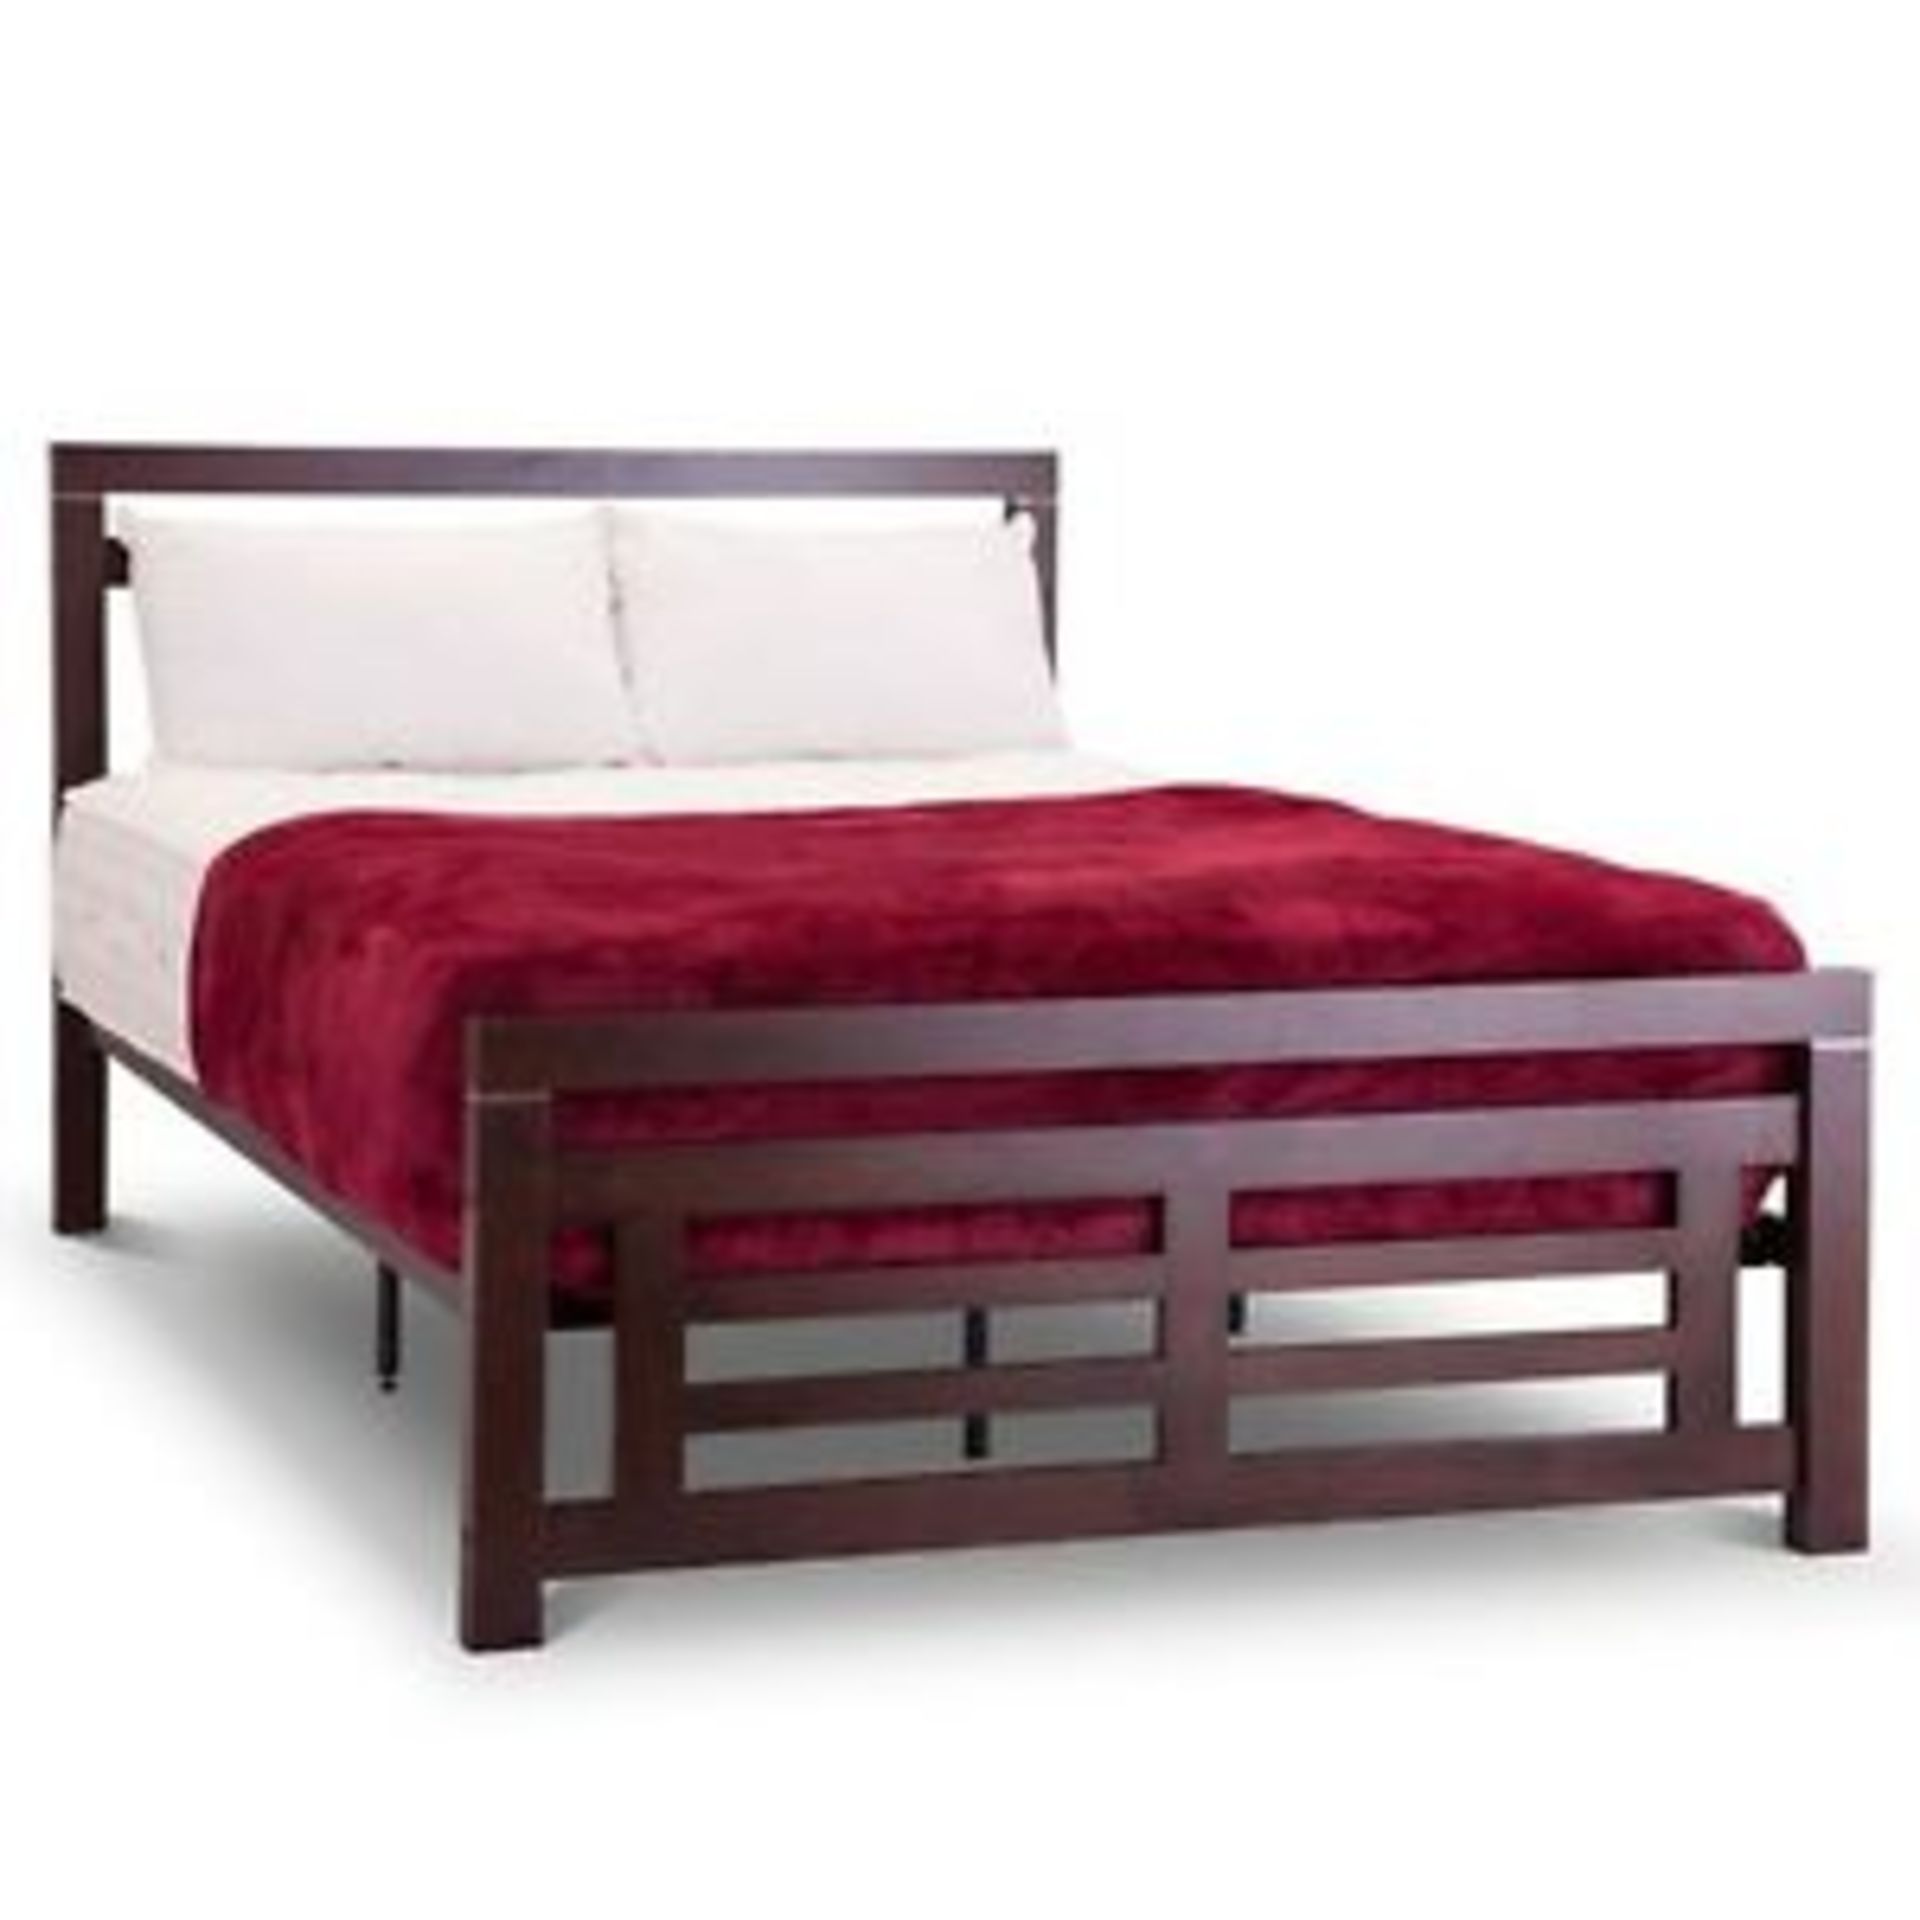 1 BRAND NEW BOXED COLORADO WENGE 4FT 6" DOUBLE BED